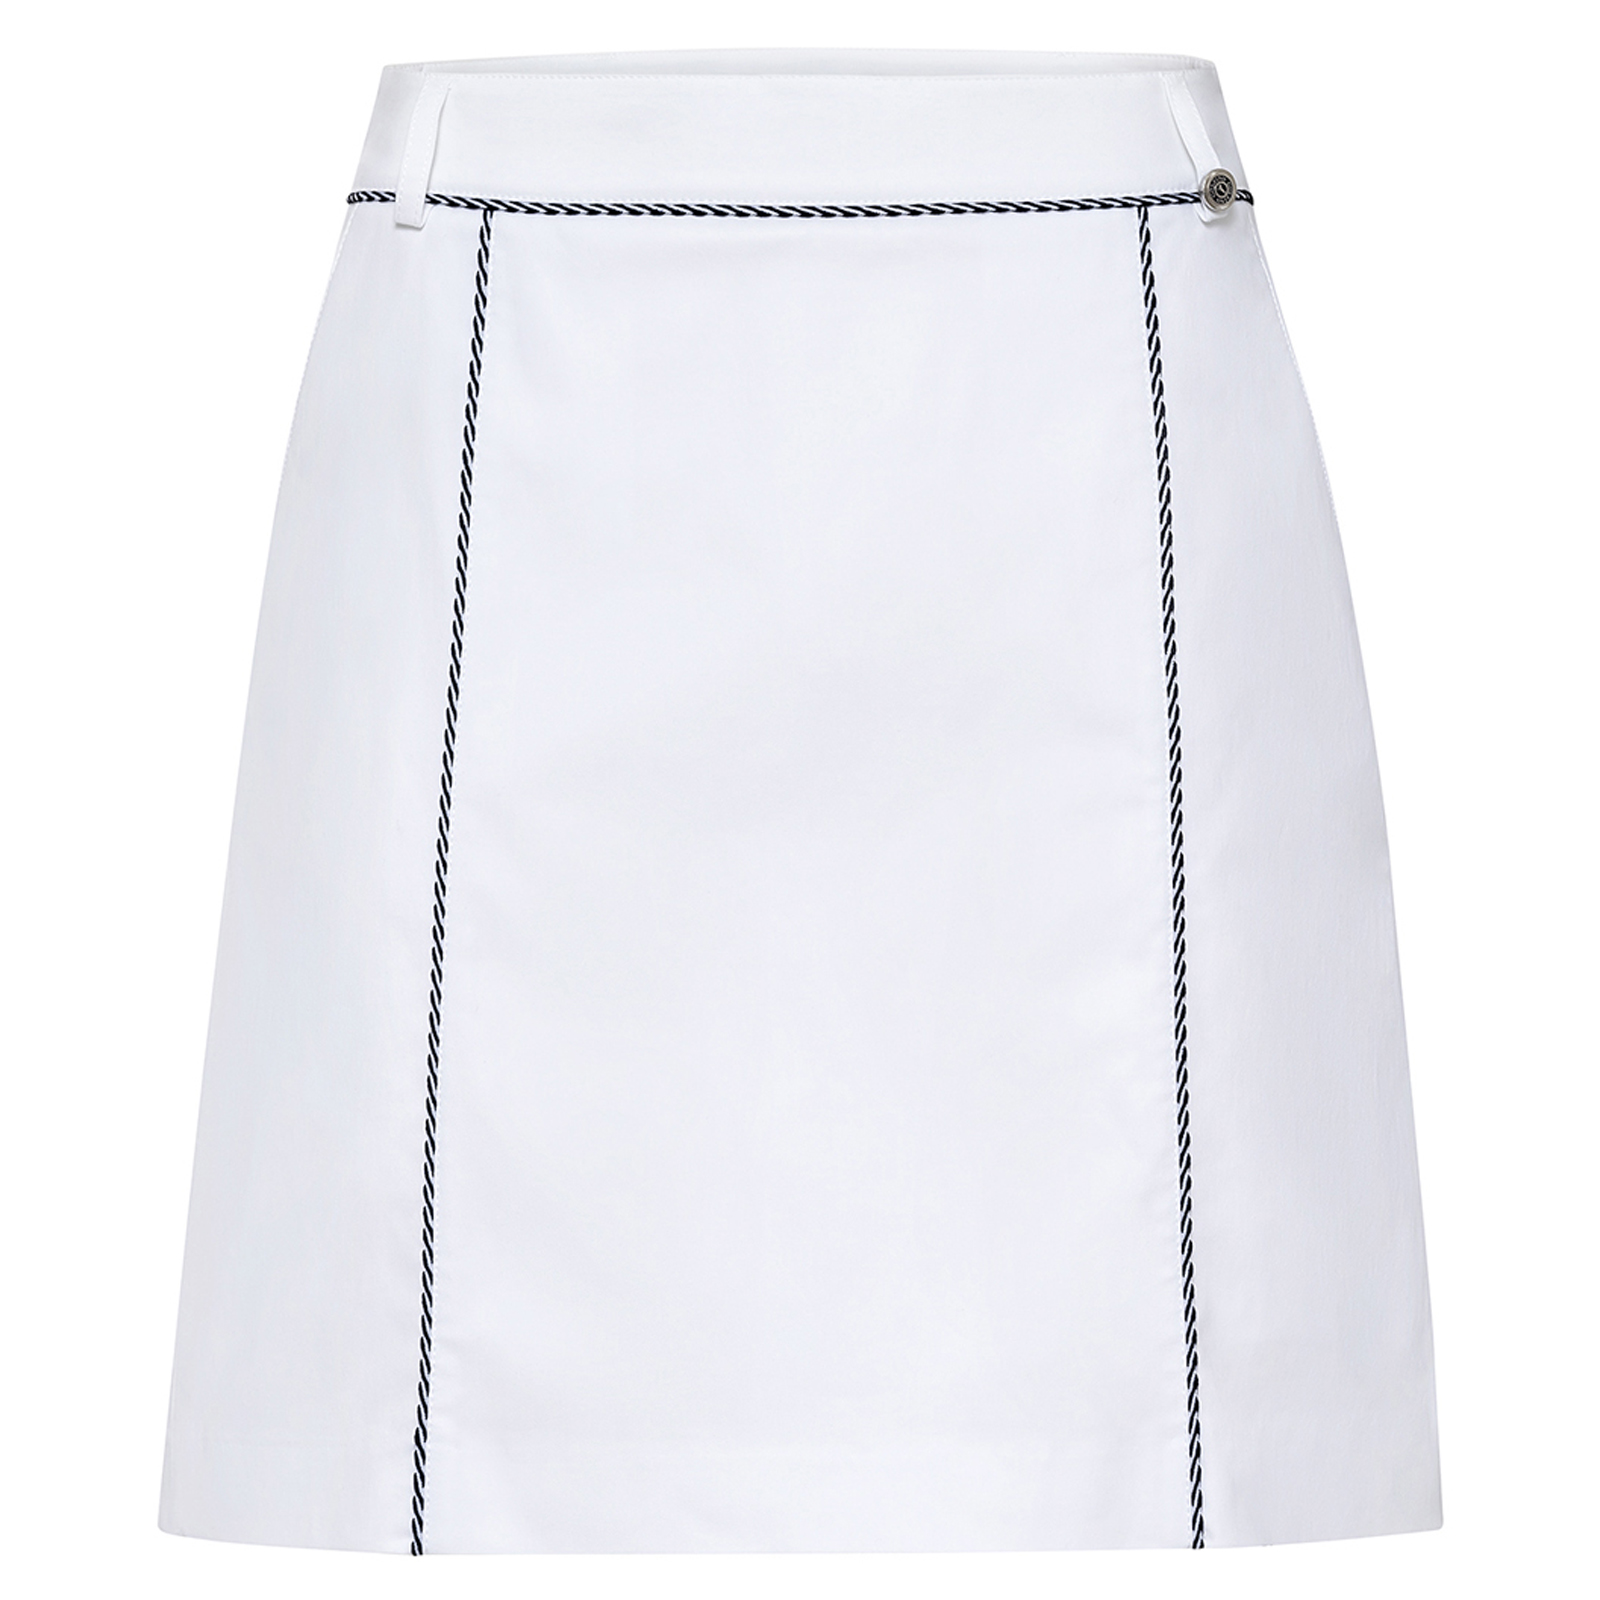 Ladies' golf skort with sun protection and extra stretch comfort, made from a cotton blend